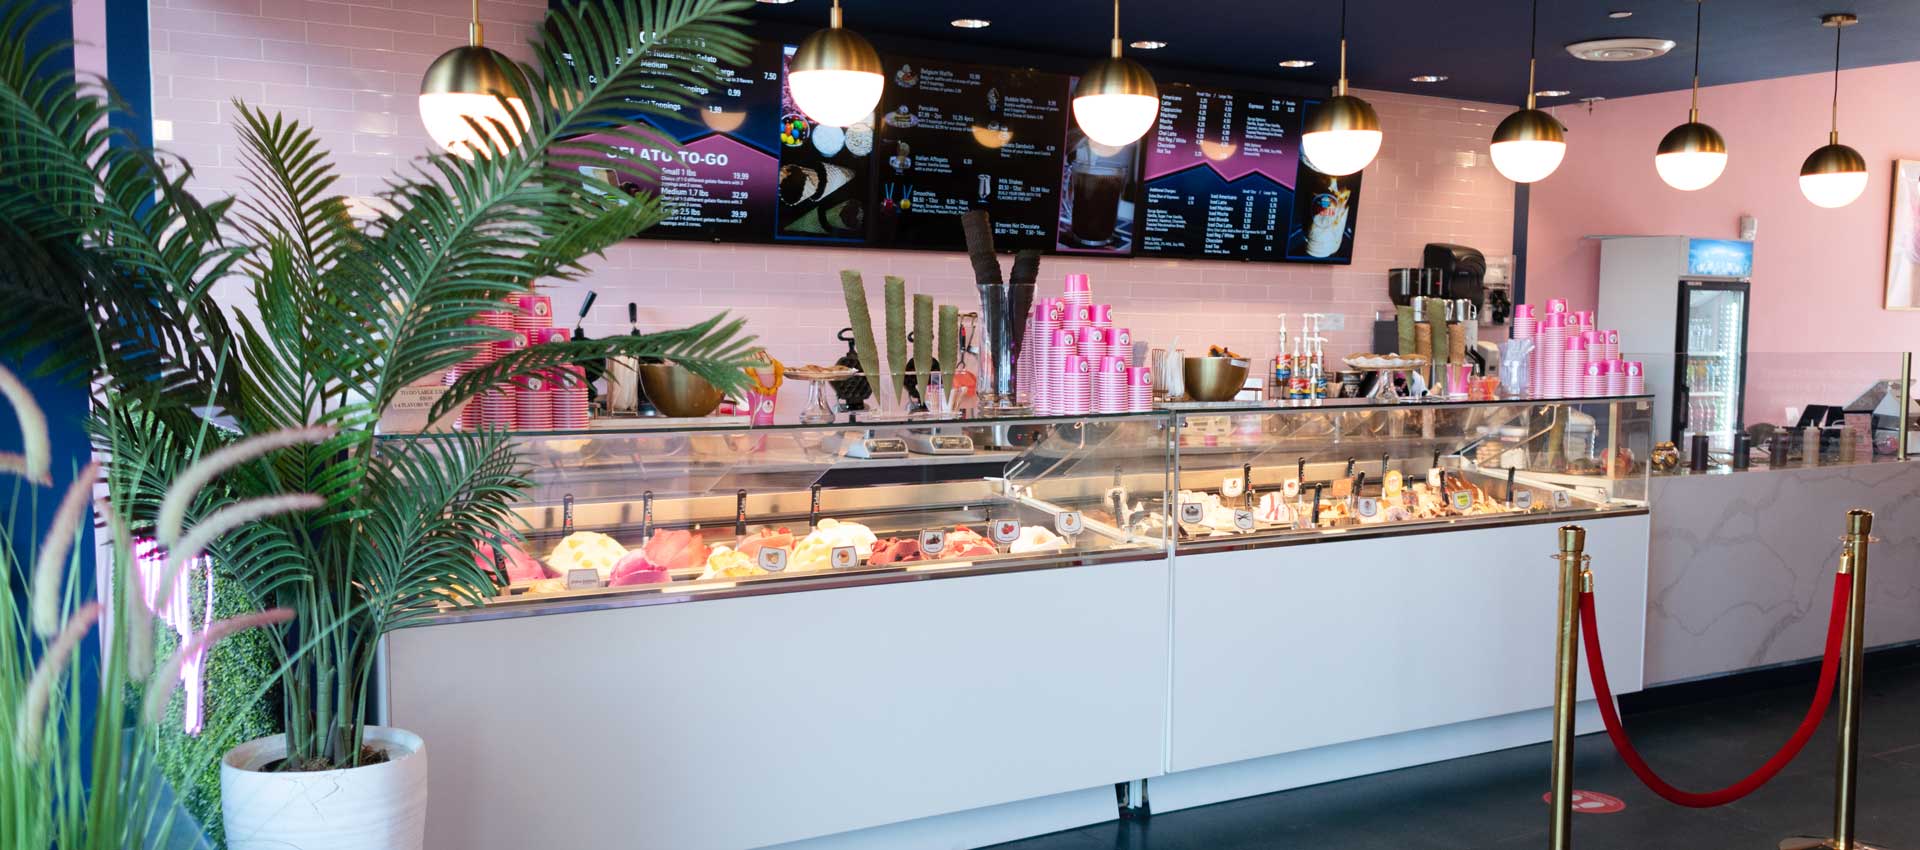 The Story Of I Scream Gelato and Our Franchise Opportunities